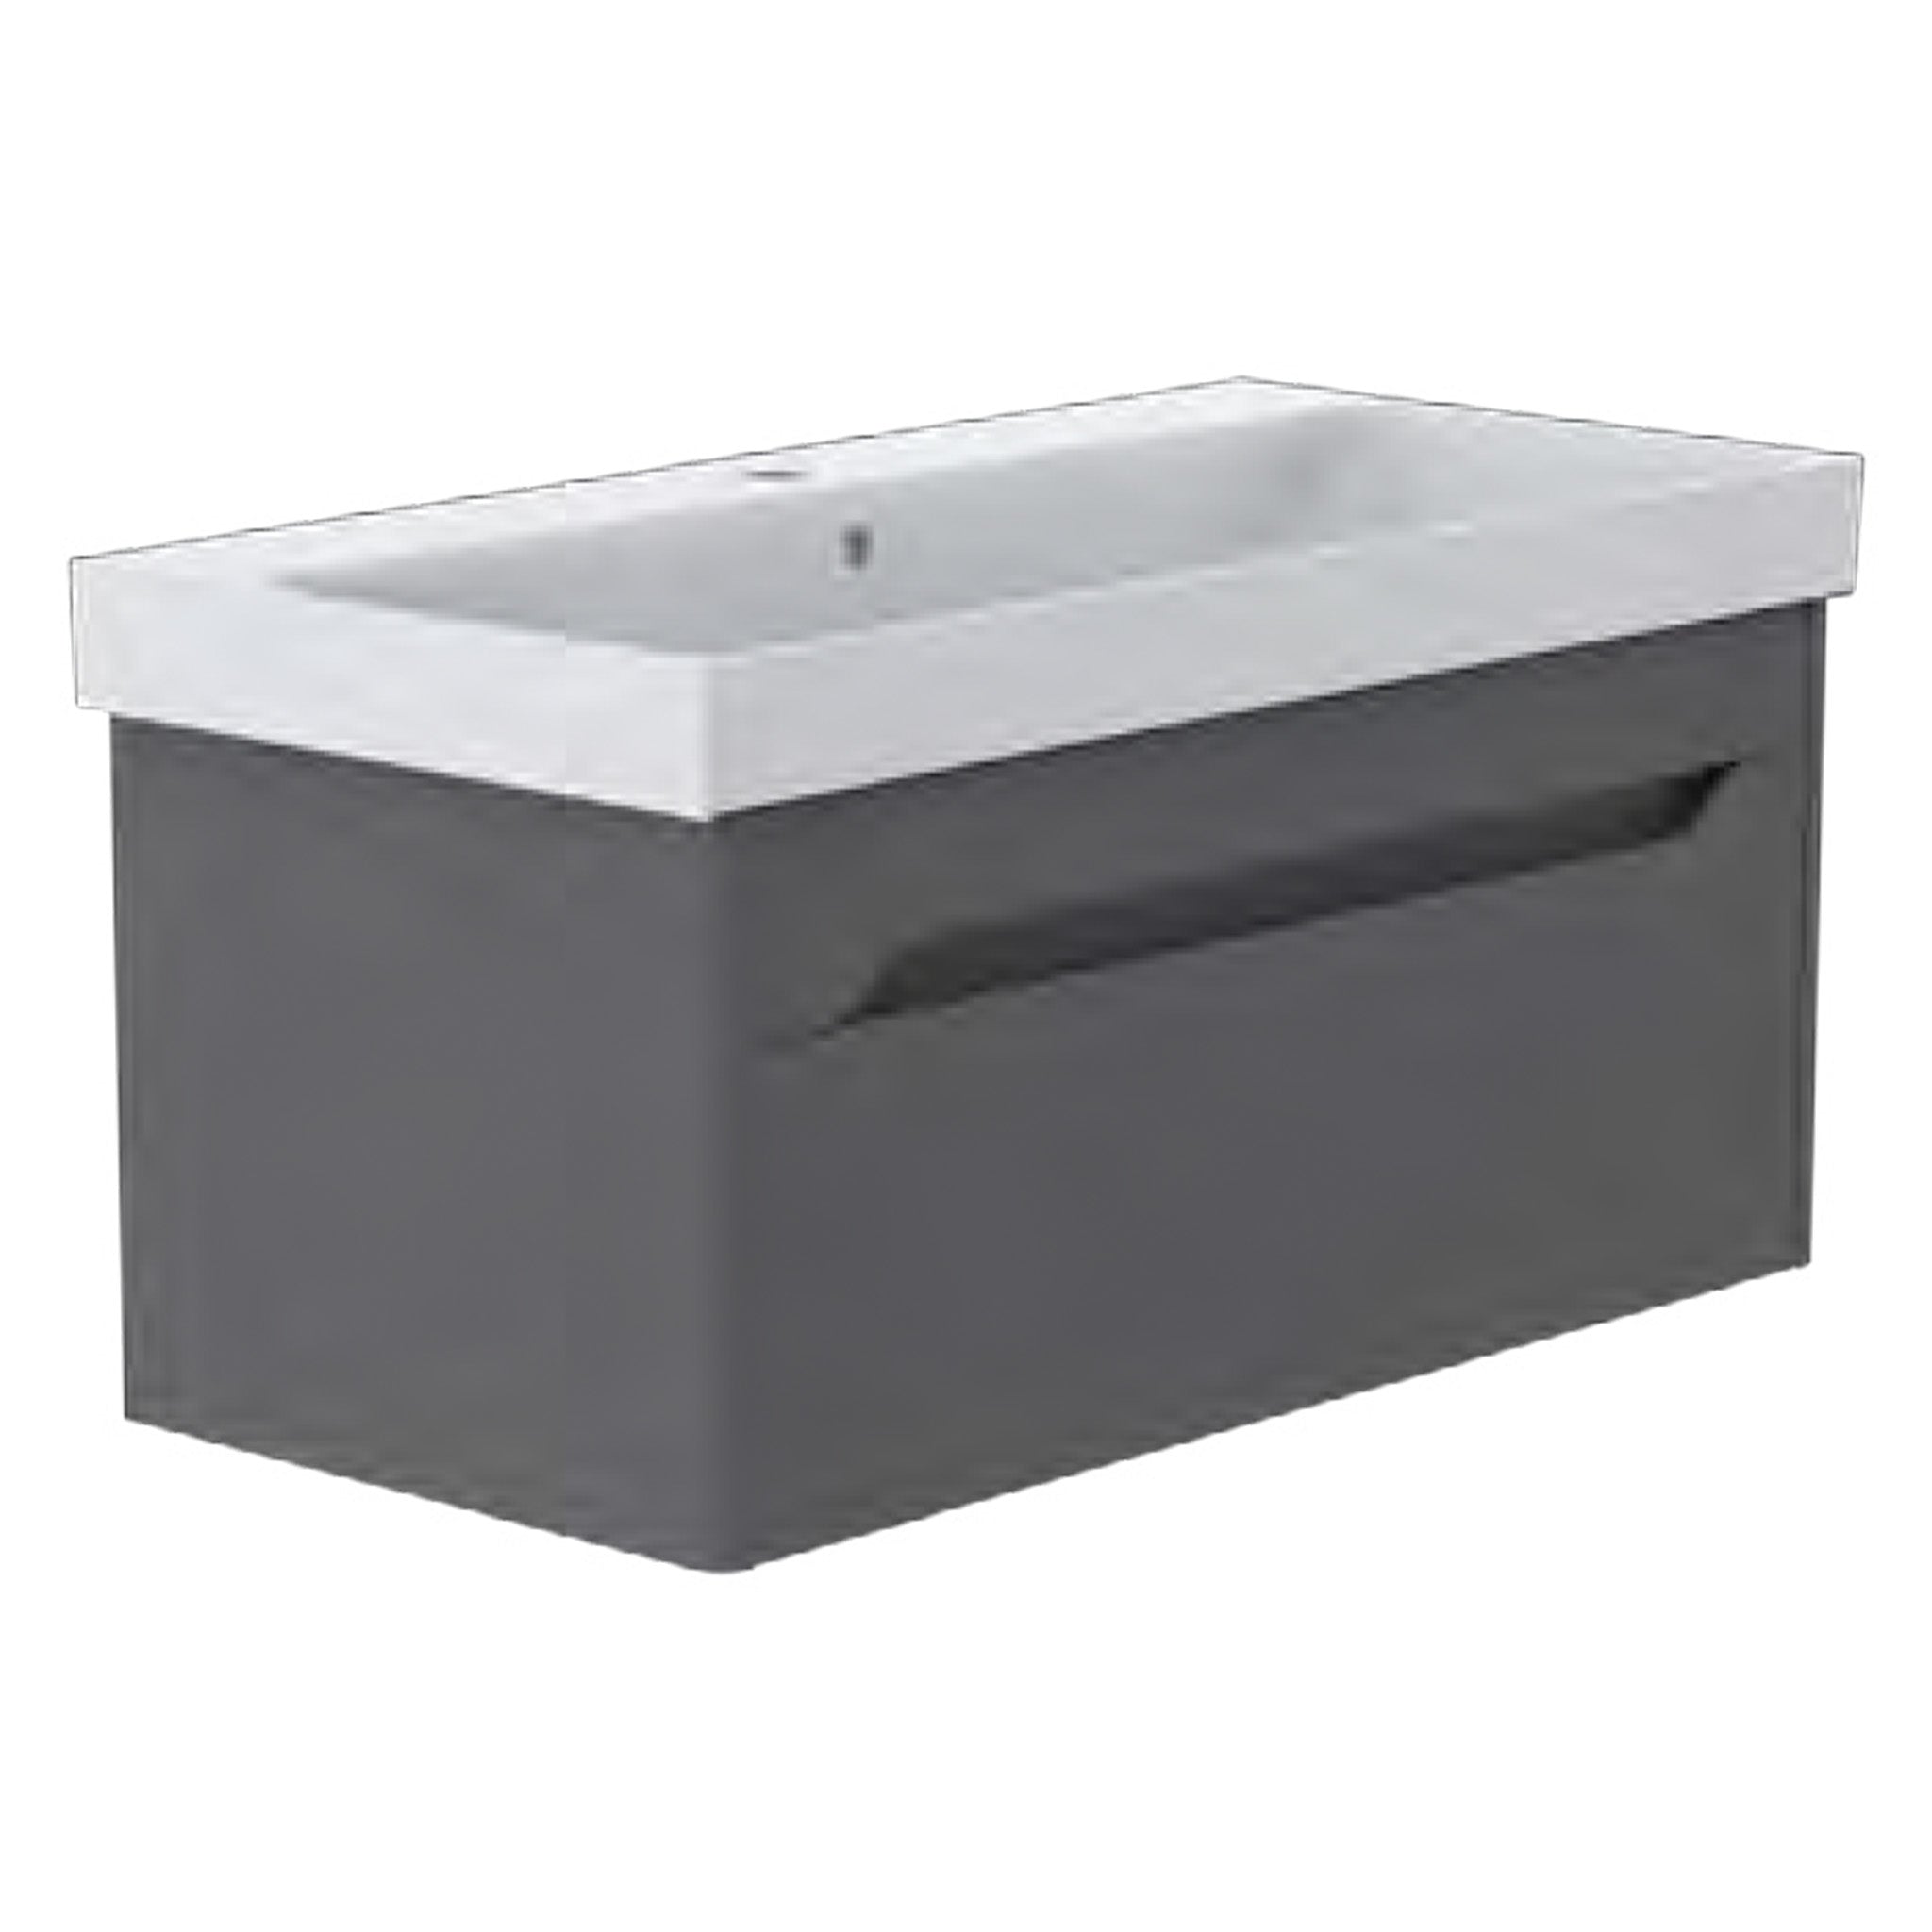 GSI Nubes Lacquer 100 x 50 1 Drawer Vanity Unit